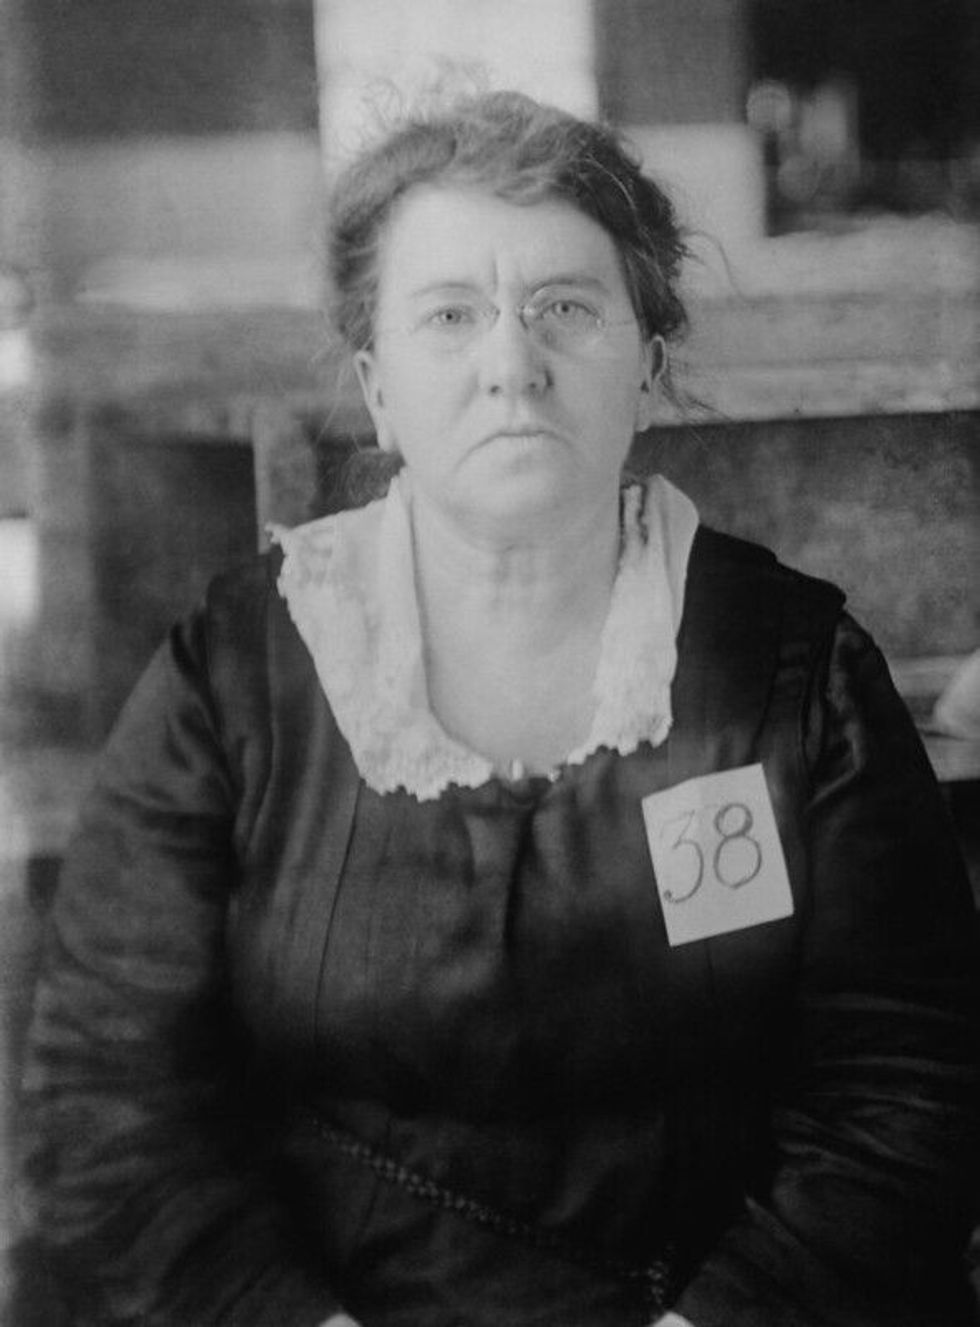 Explore the most popular Emma Goldman quotes that will give you some food for thought.